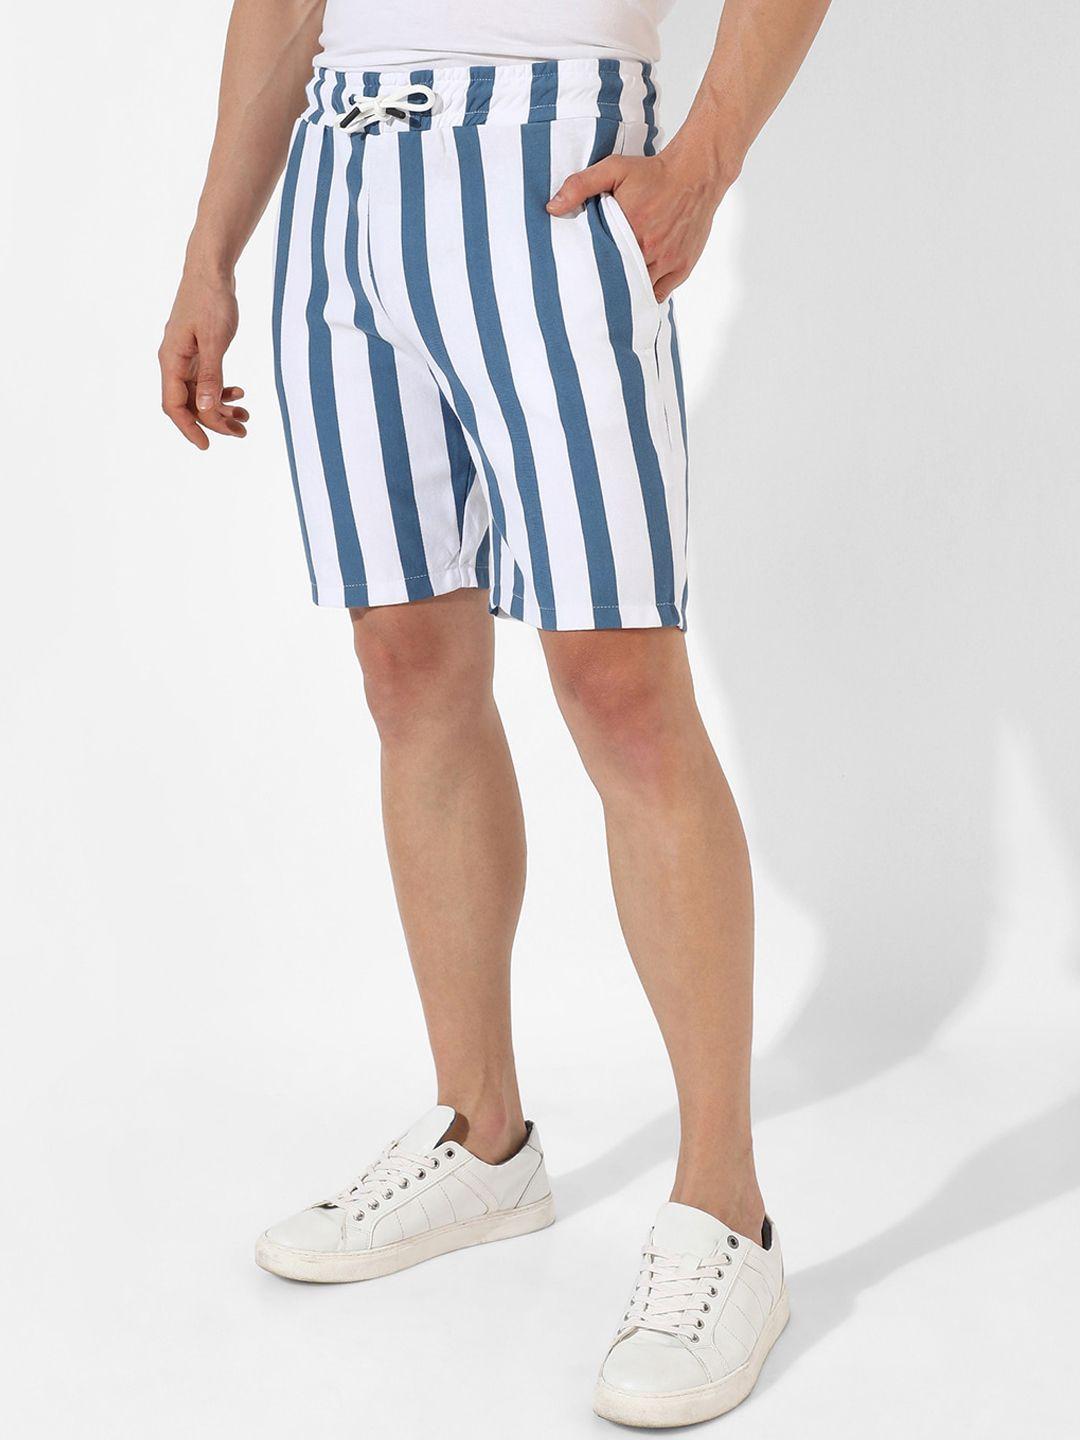 campus-sutra-men-mid-rise-striped-shorts